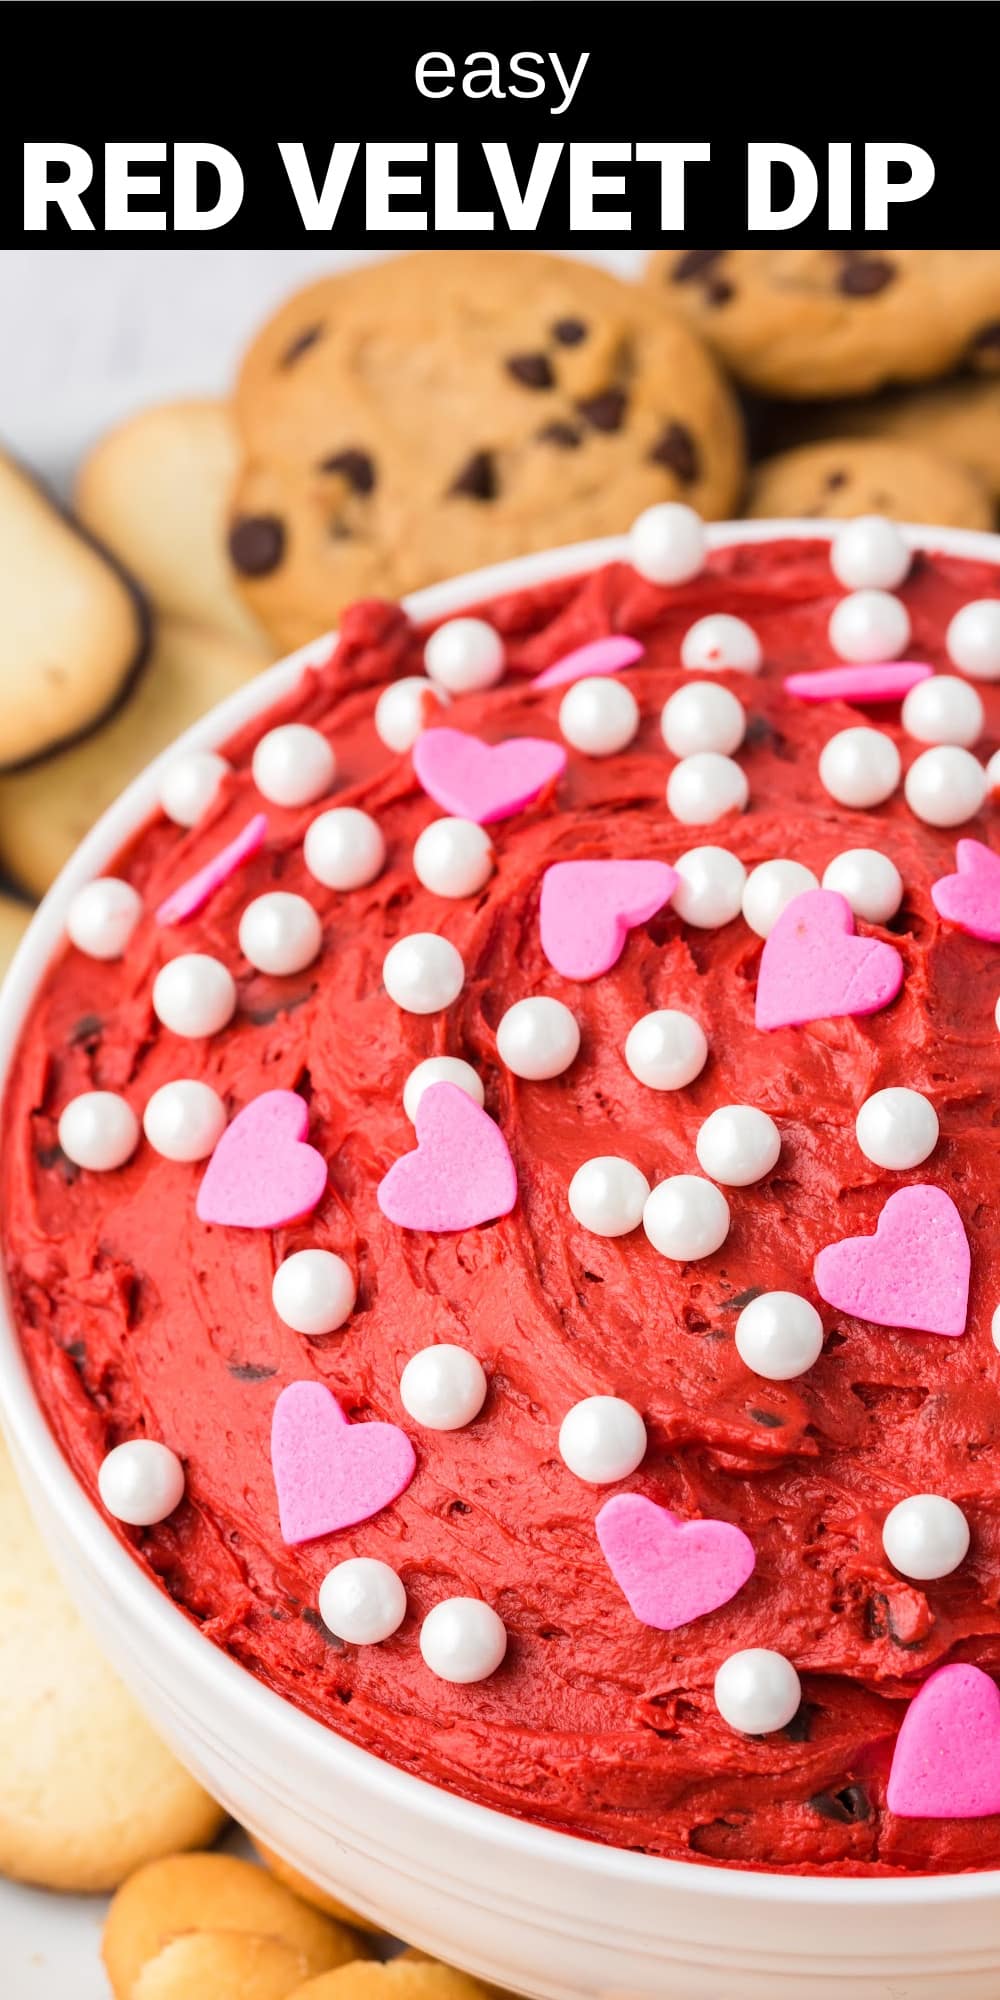 This easy Red Velvet Dessert Dip is the perfect party food or sweet treat to serve with cookies, graham crackers, or your favorite fruit. Loaded with red velvet flavor and studded with chocolate chips, this rich and creamy dip is completely irresistible.